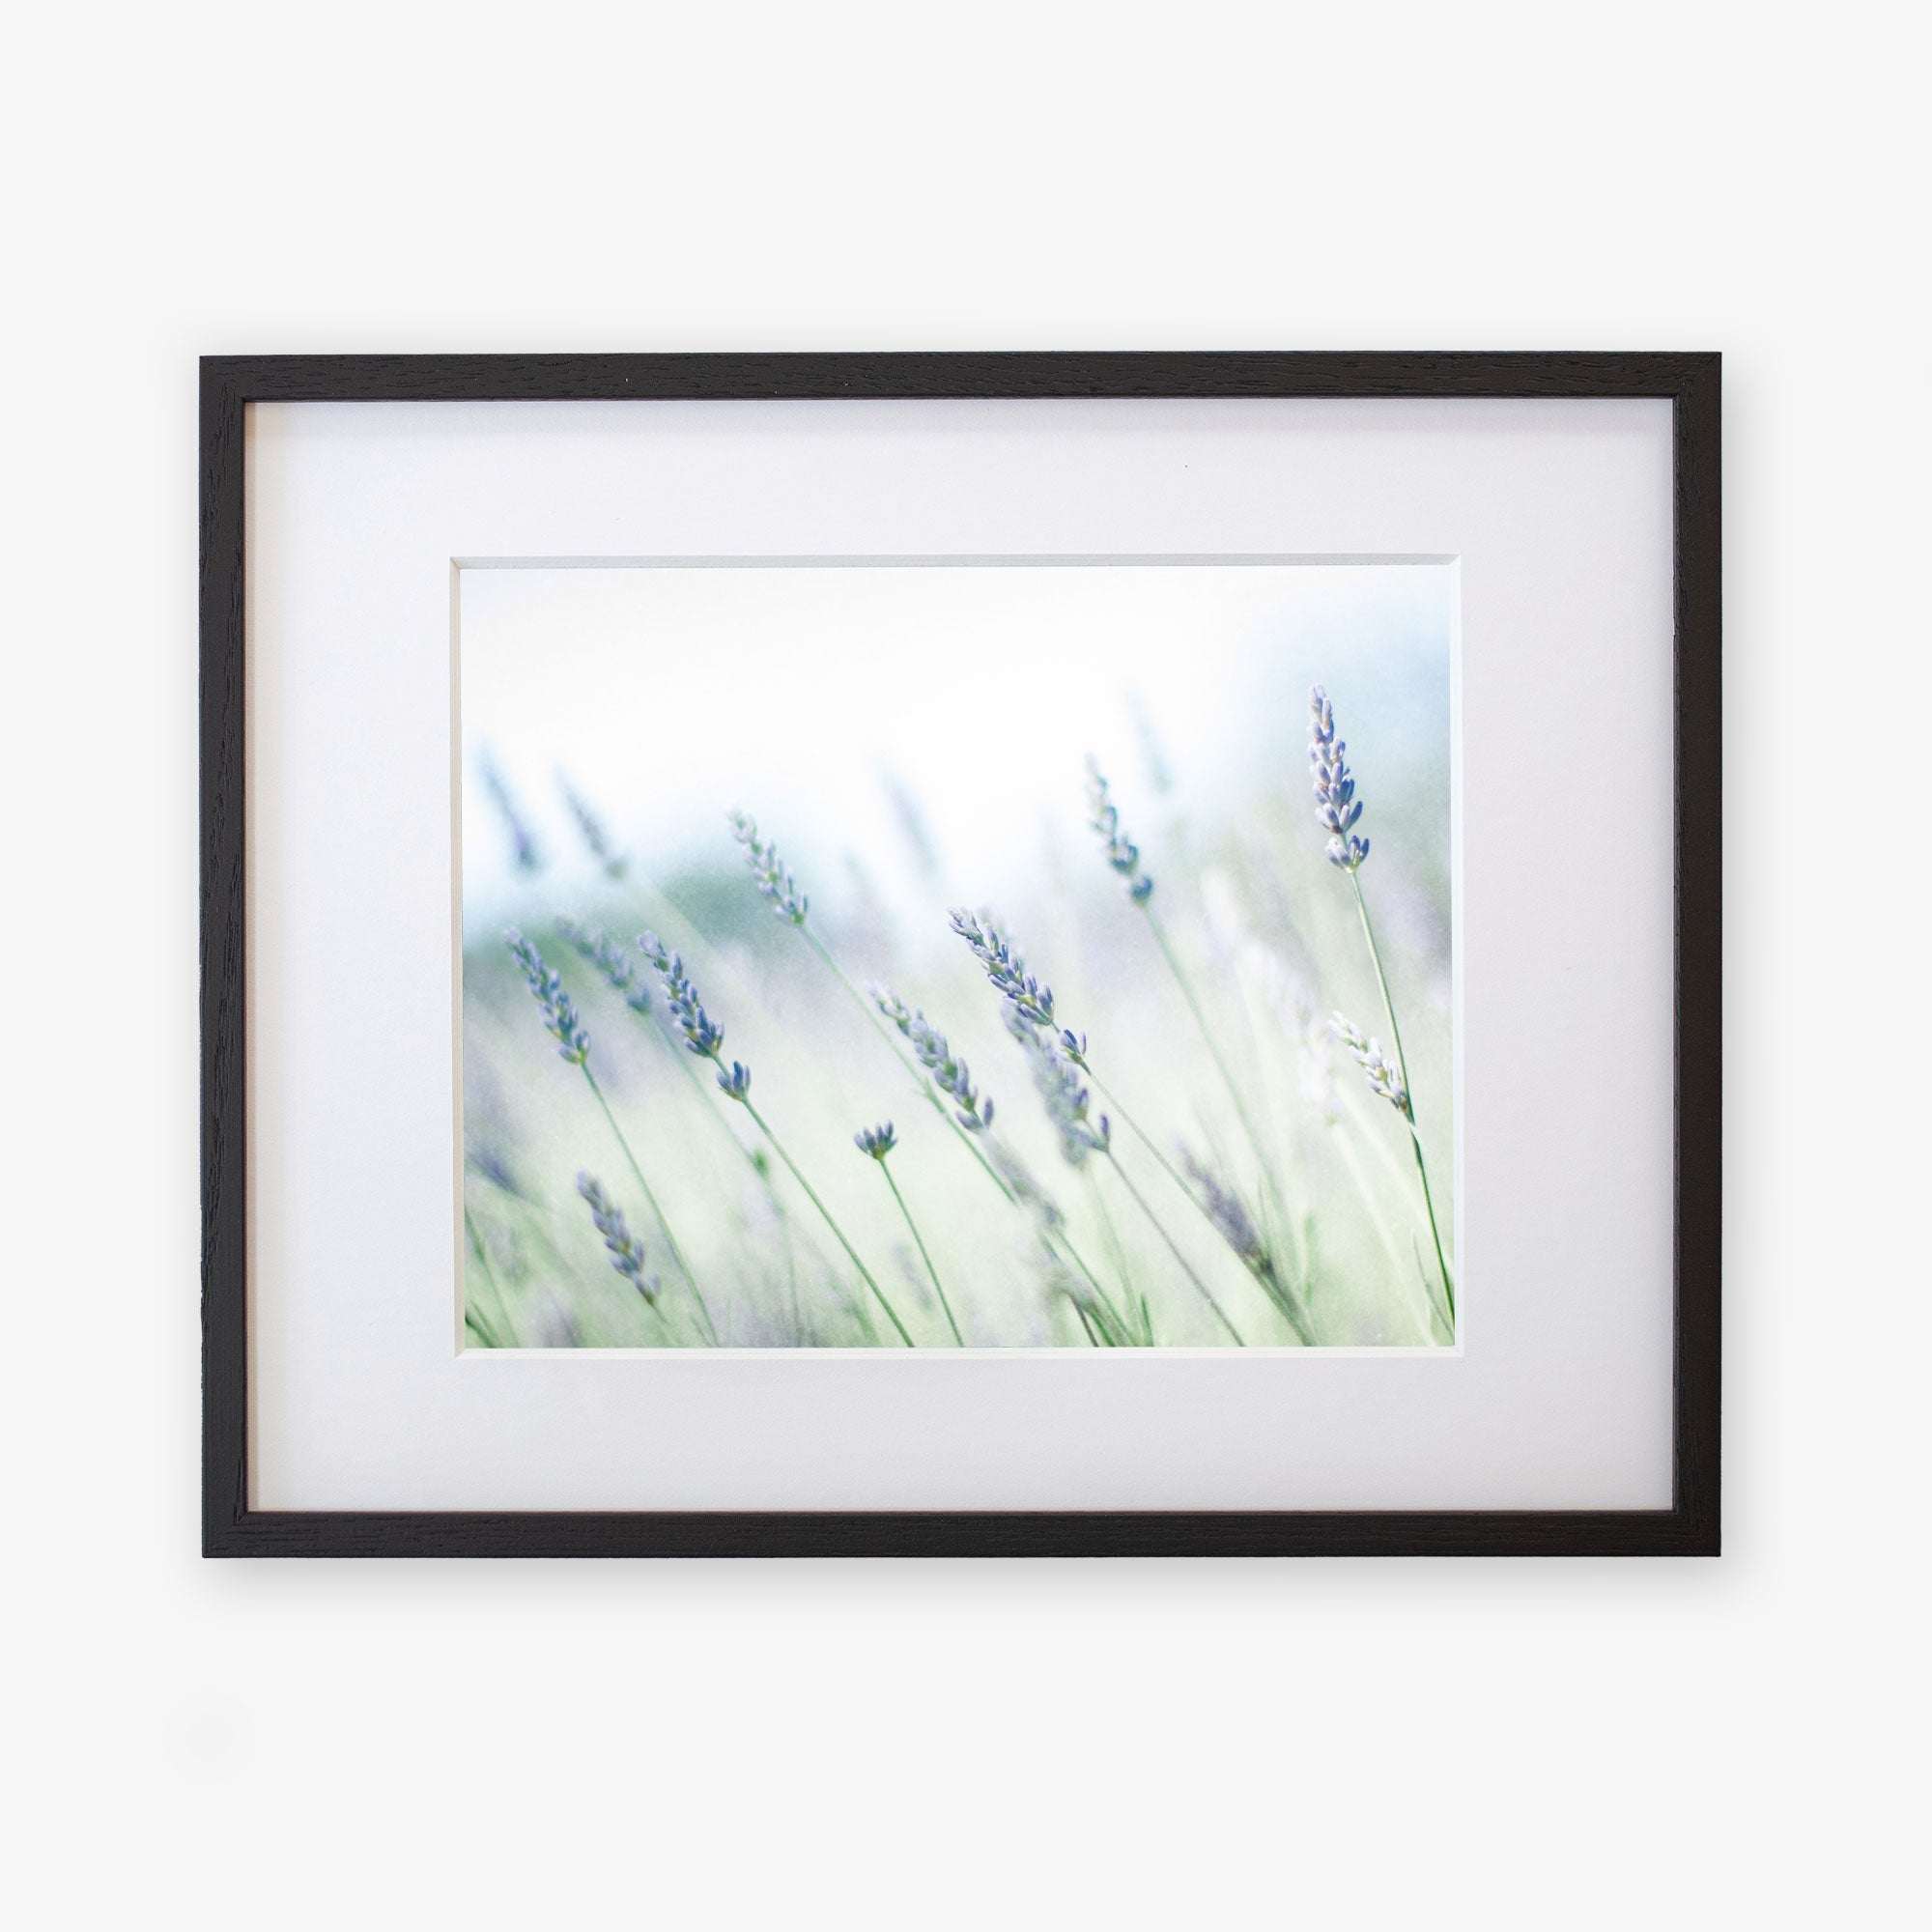 Framed Rustic Farmhouse Floral Wall Art, &#39;Buds of Lavender&#39; by Offley Green, with a soft focus creating a dreamy atmosphere, mounted on a white background within a black frame.